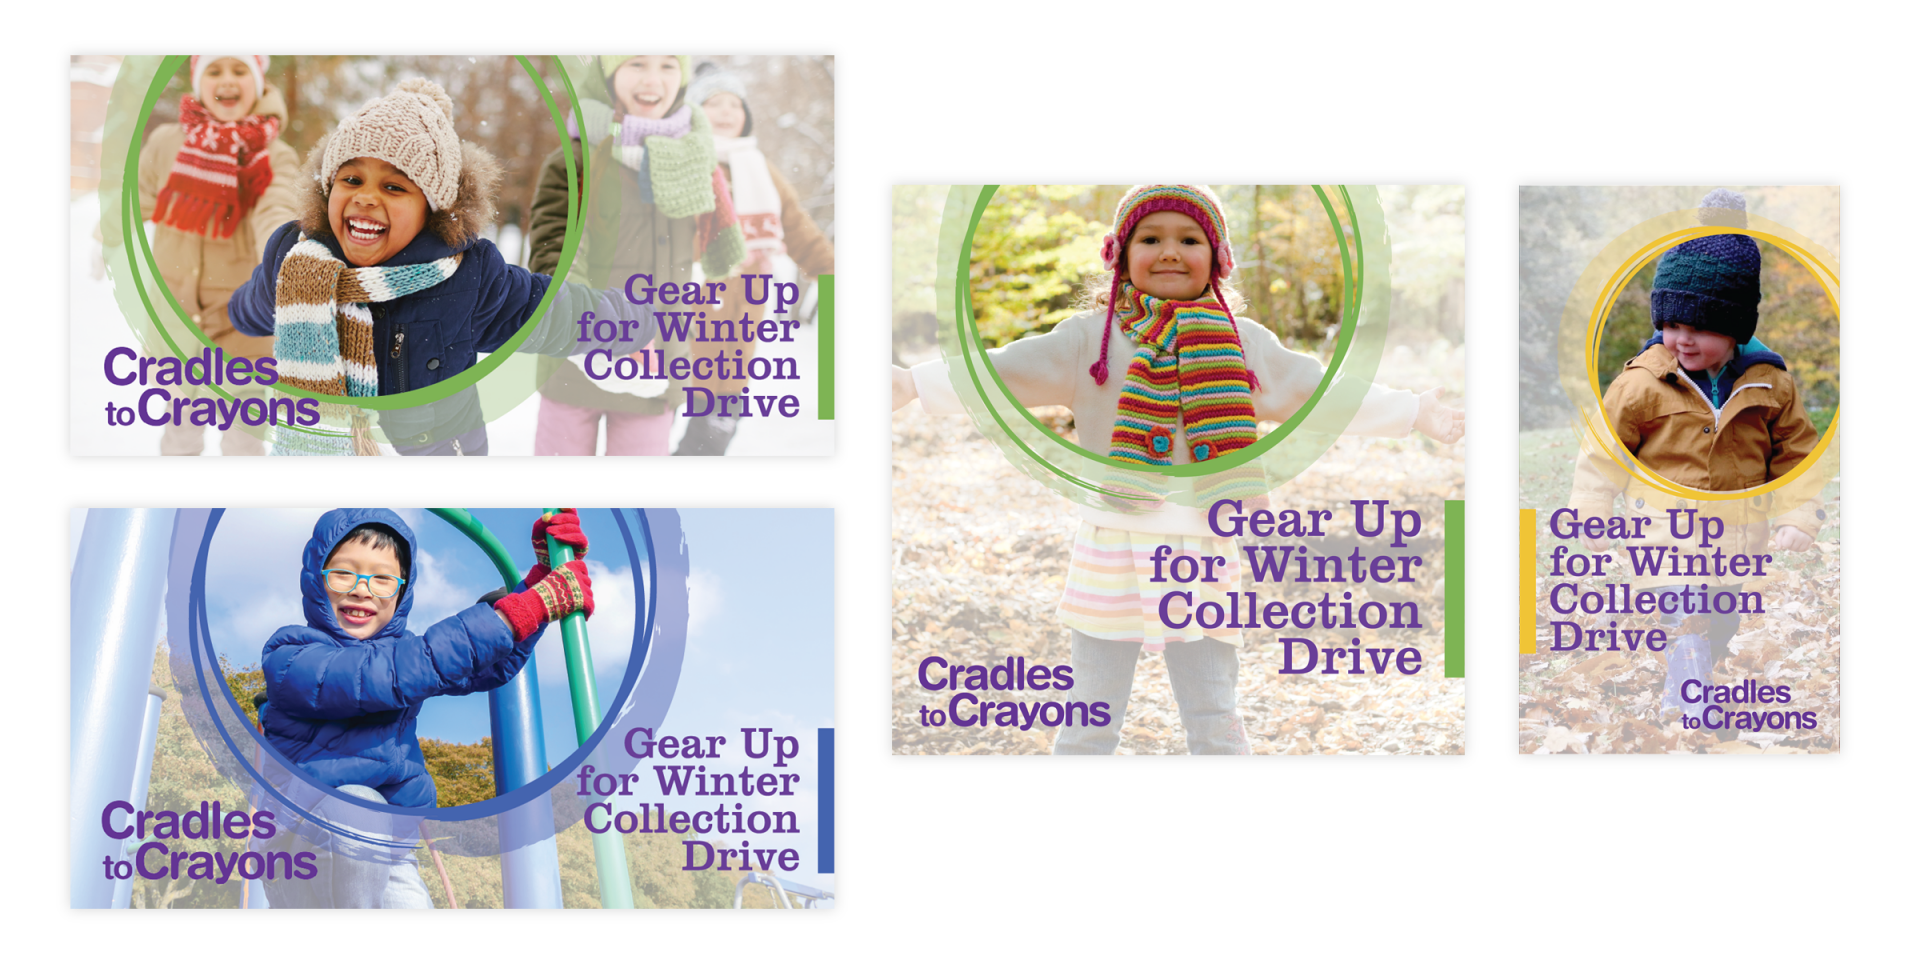 Gear Up For Winter Collection Drive Digital Marketing